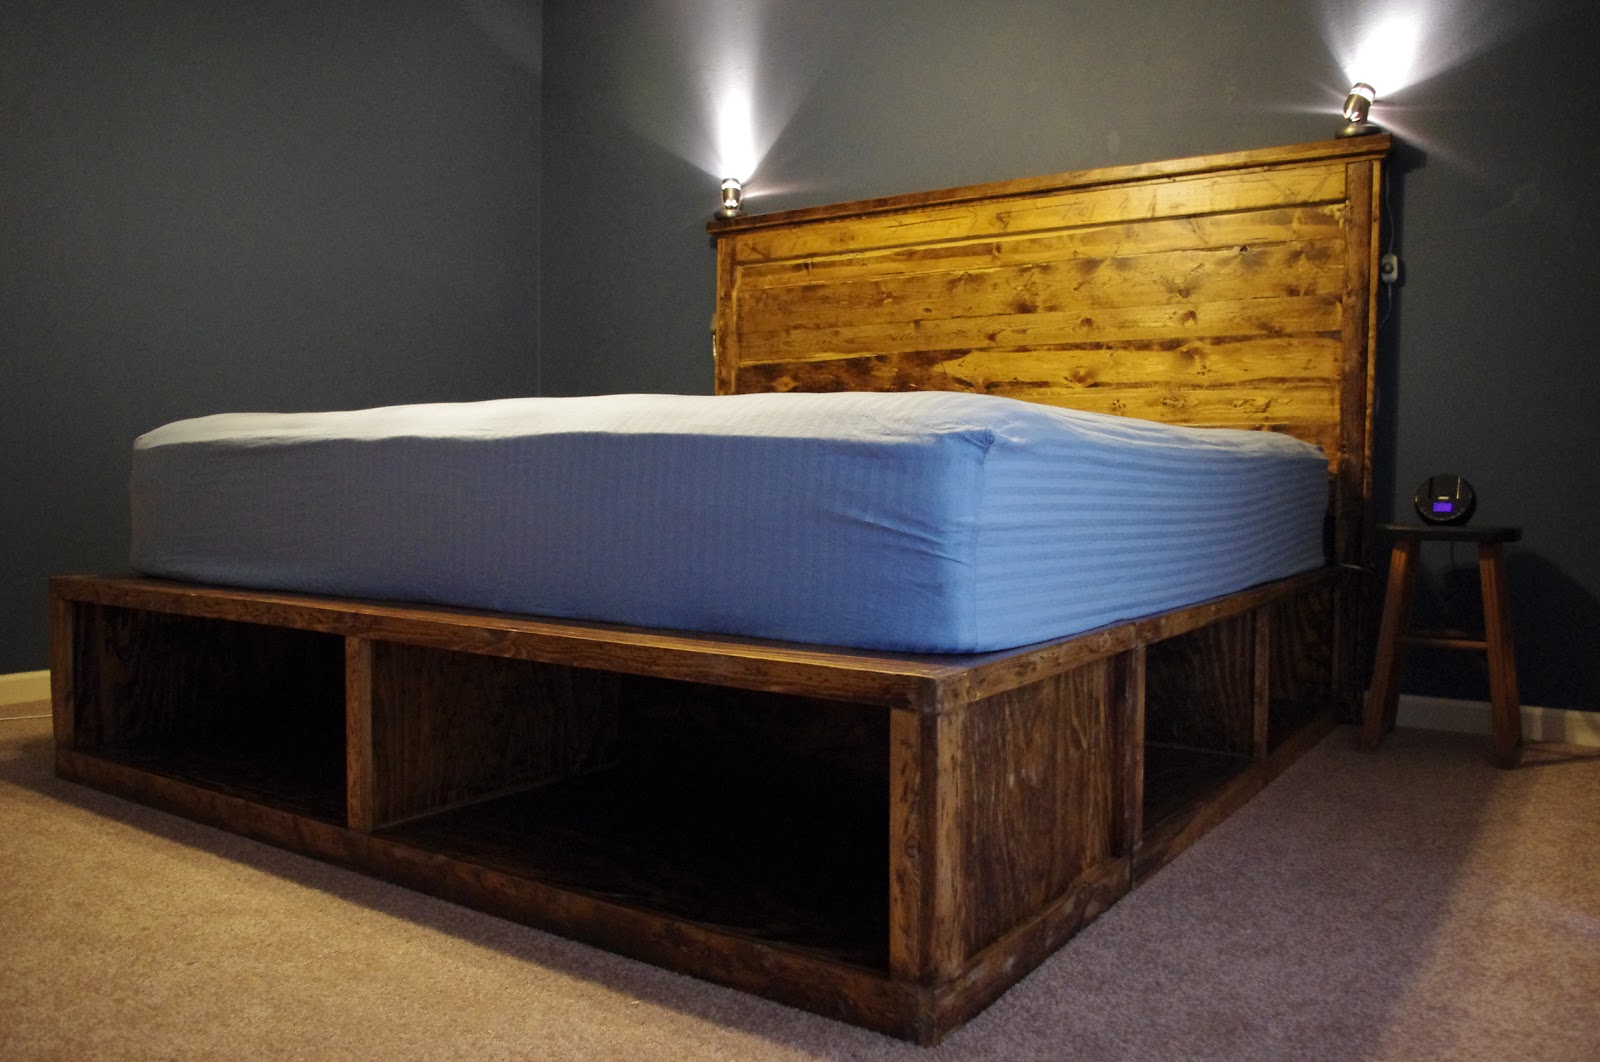 Free Platform Bed Plans | Build Platform Beds With These Easy Plans